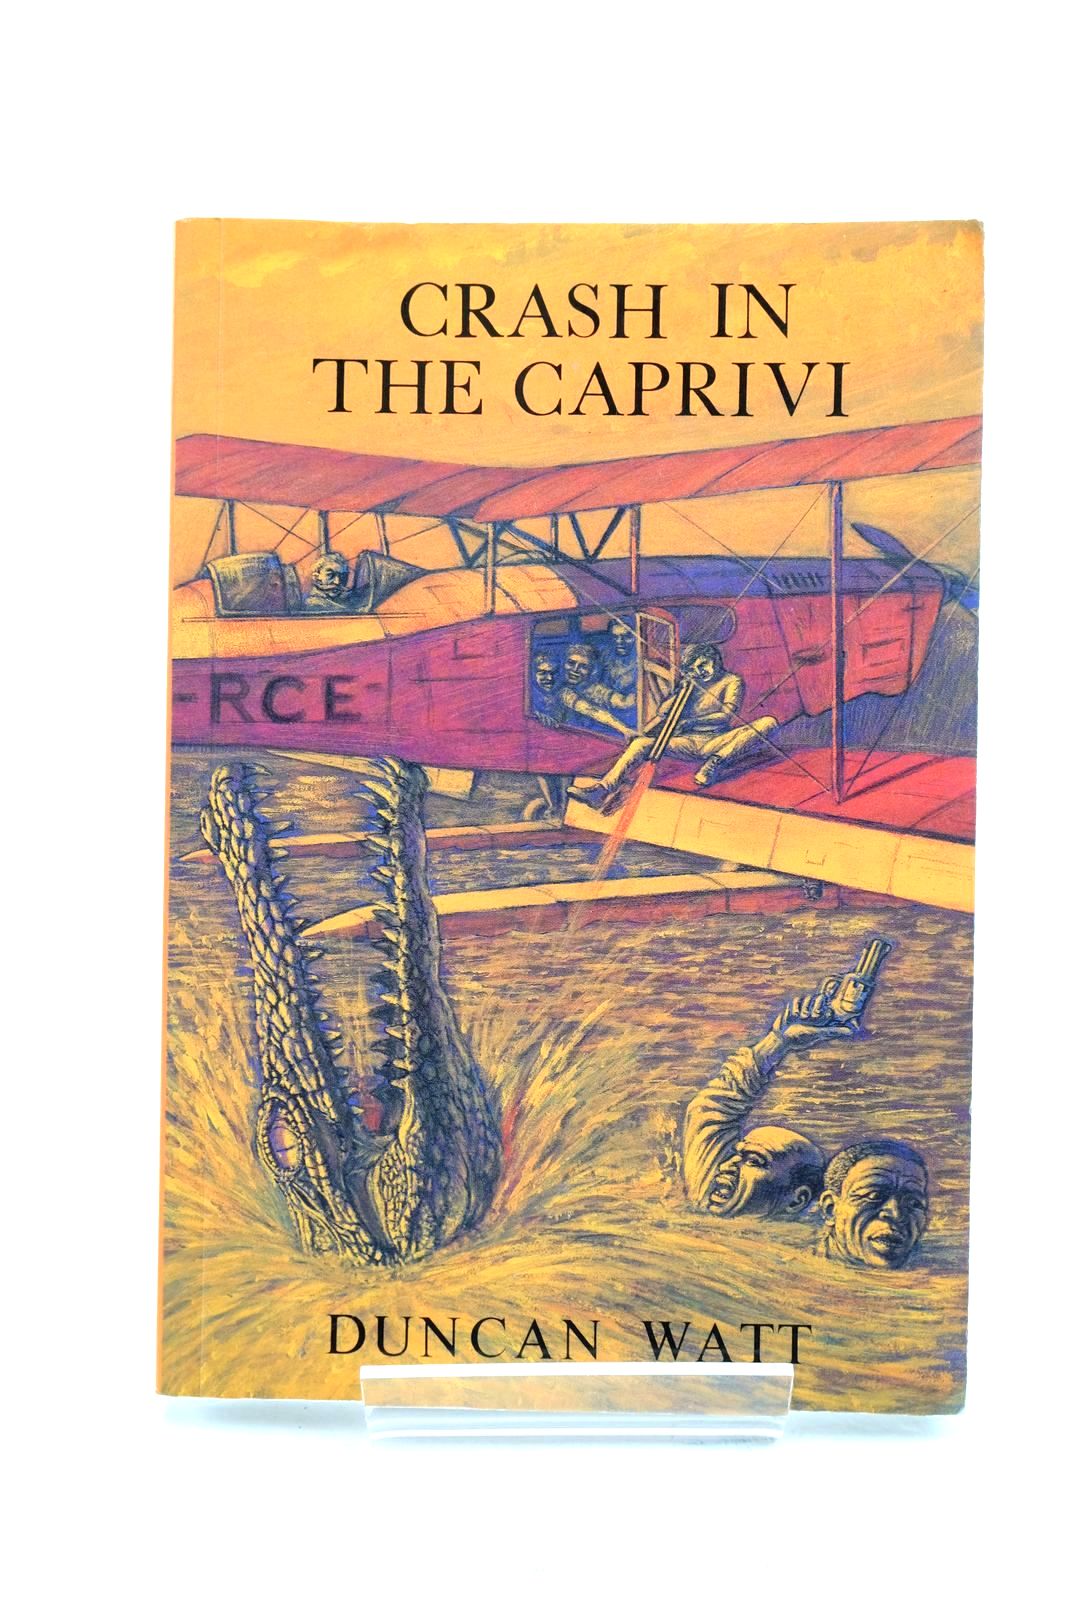 Photo of CRASH IN THE CAPRIVI written by Watts, Duncan illustrated by O'Shea, Paul published by Tynron Press (STOCK CODE: 1320985)  for sale by Stella & Rose's Books